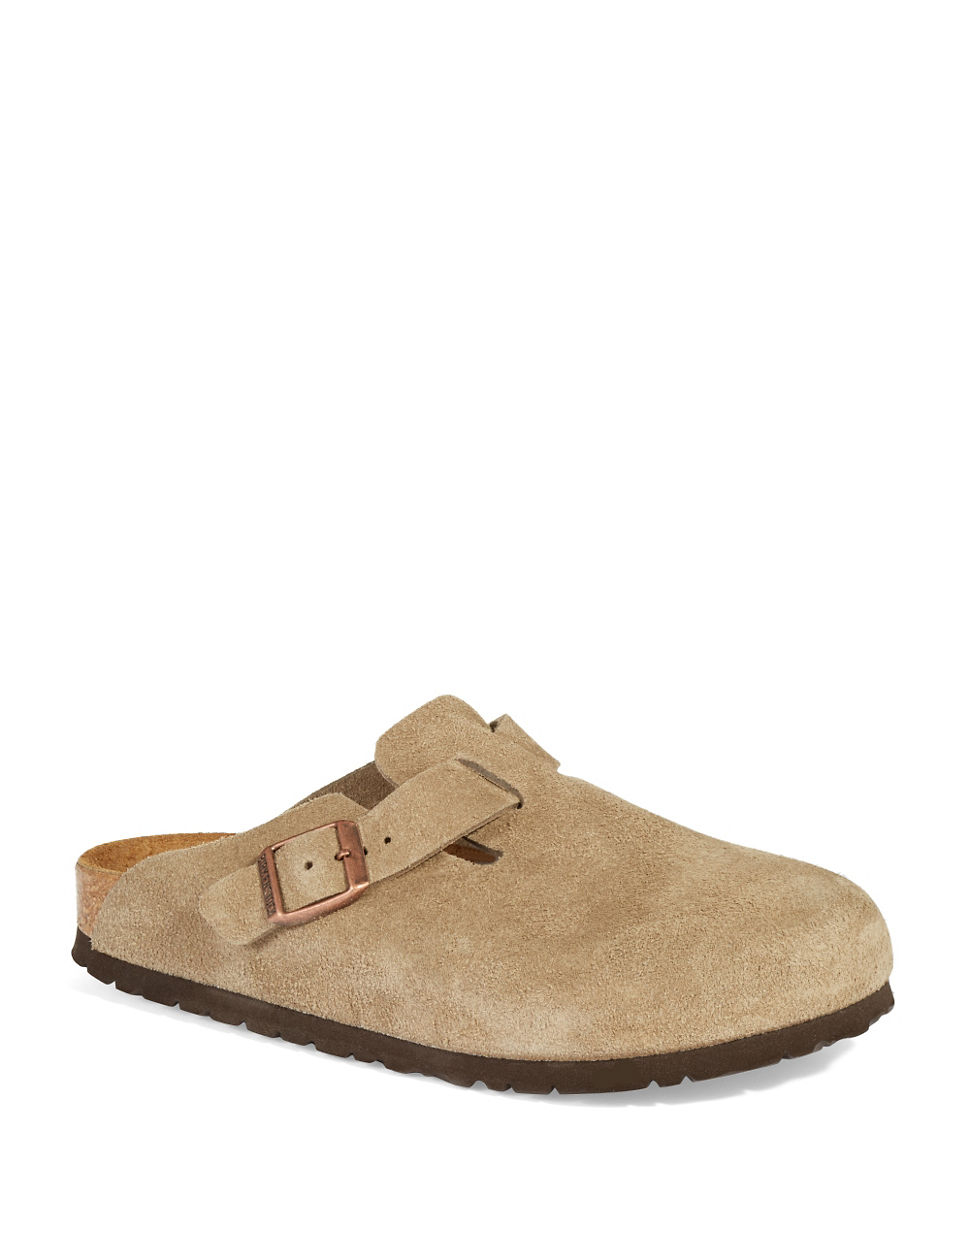 Birkenstock Boston Slip On Shoes in Brown (Taupe) | Lyst